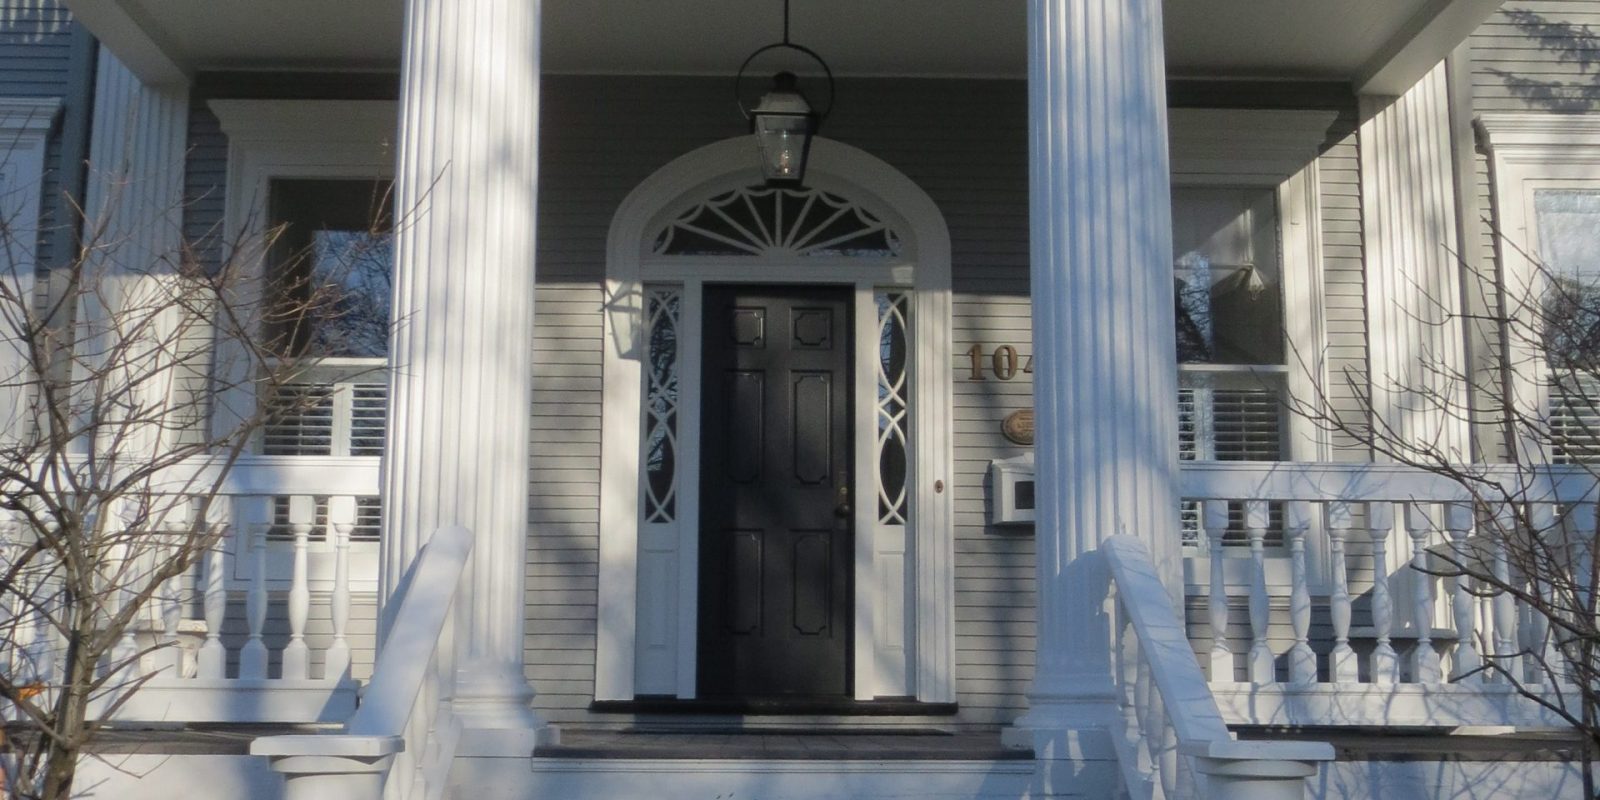 Restored Neo-Classical front porch and balcony